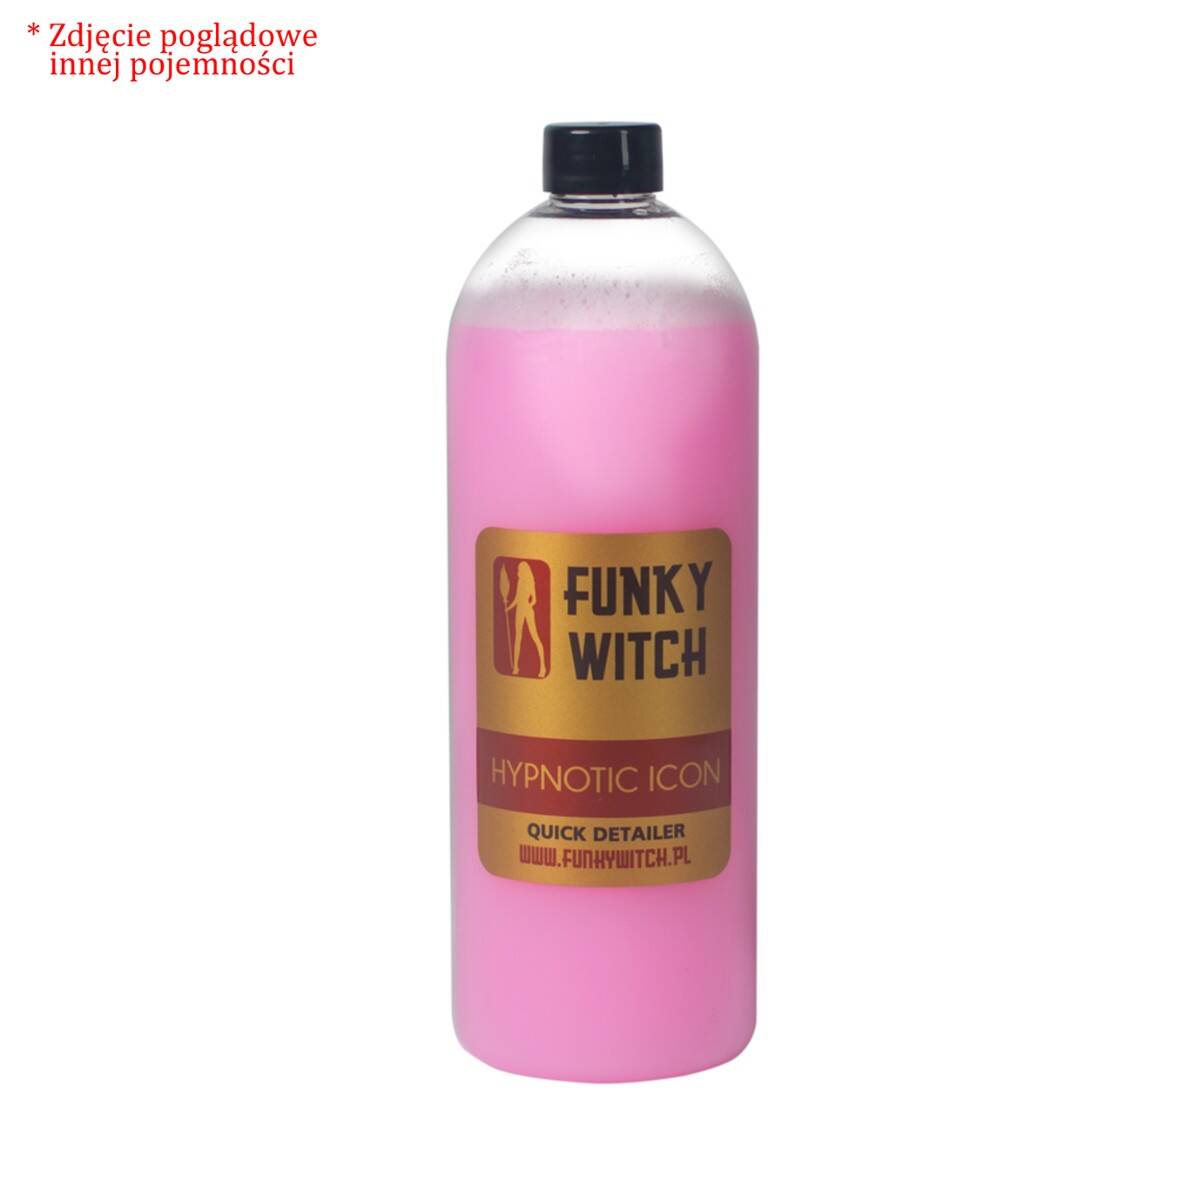 FUNKY WITCH Hypnotic Icon Quick Detailer 5l Quick Detailer